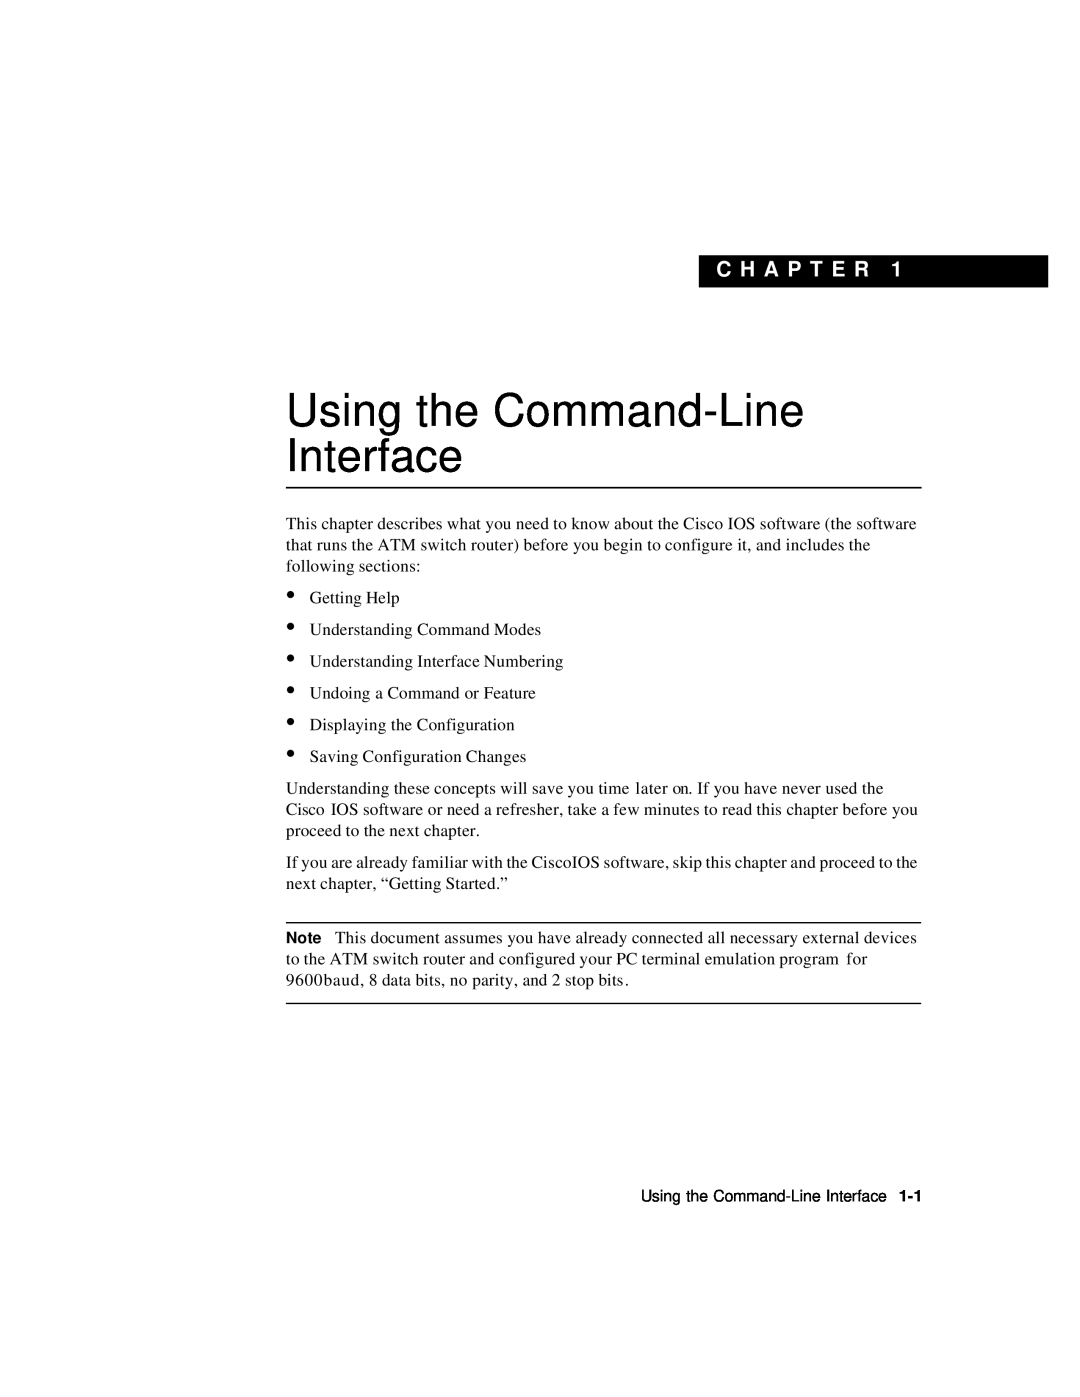 Cisco Systems 78-6897-01 manual Using the Command-Line Interface, C H A P T E R 